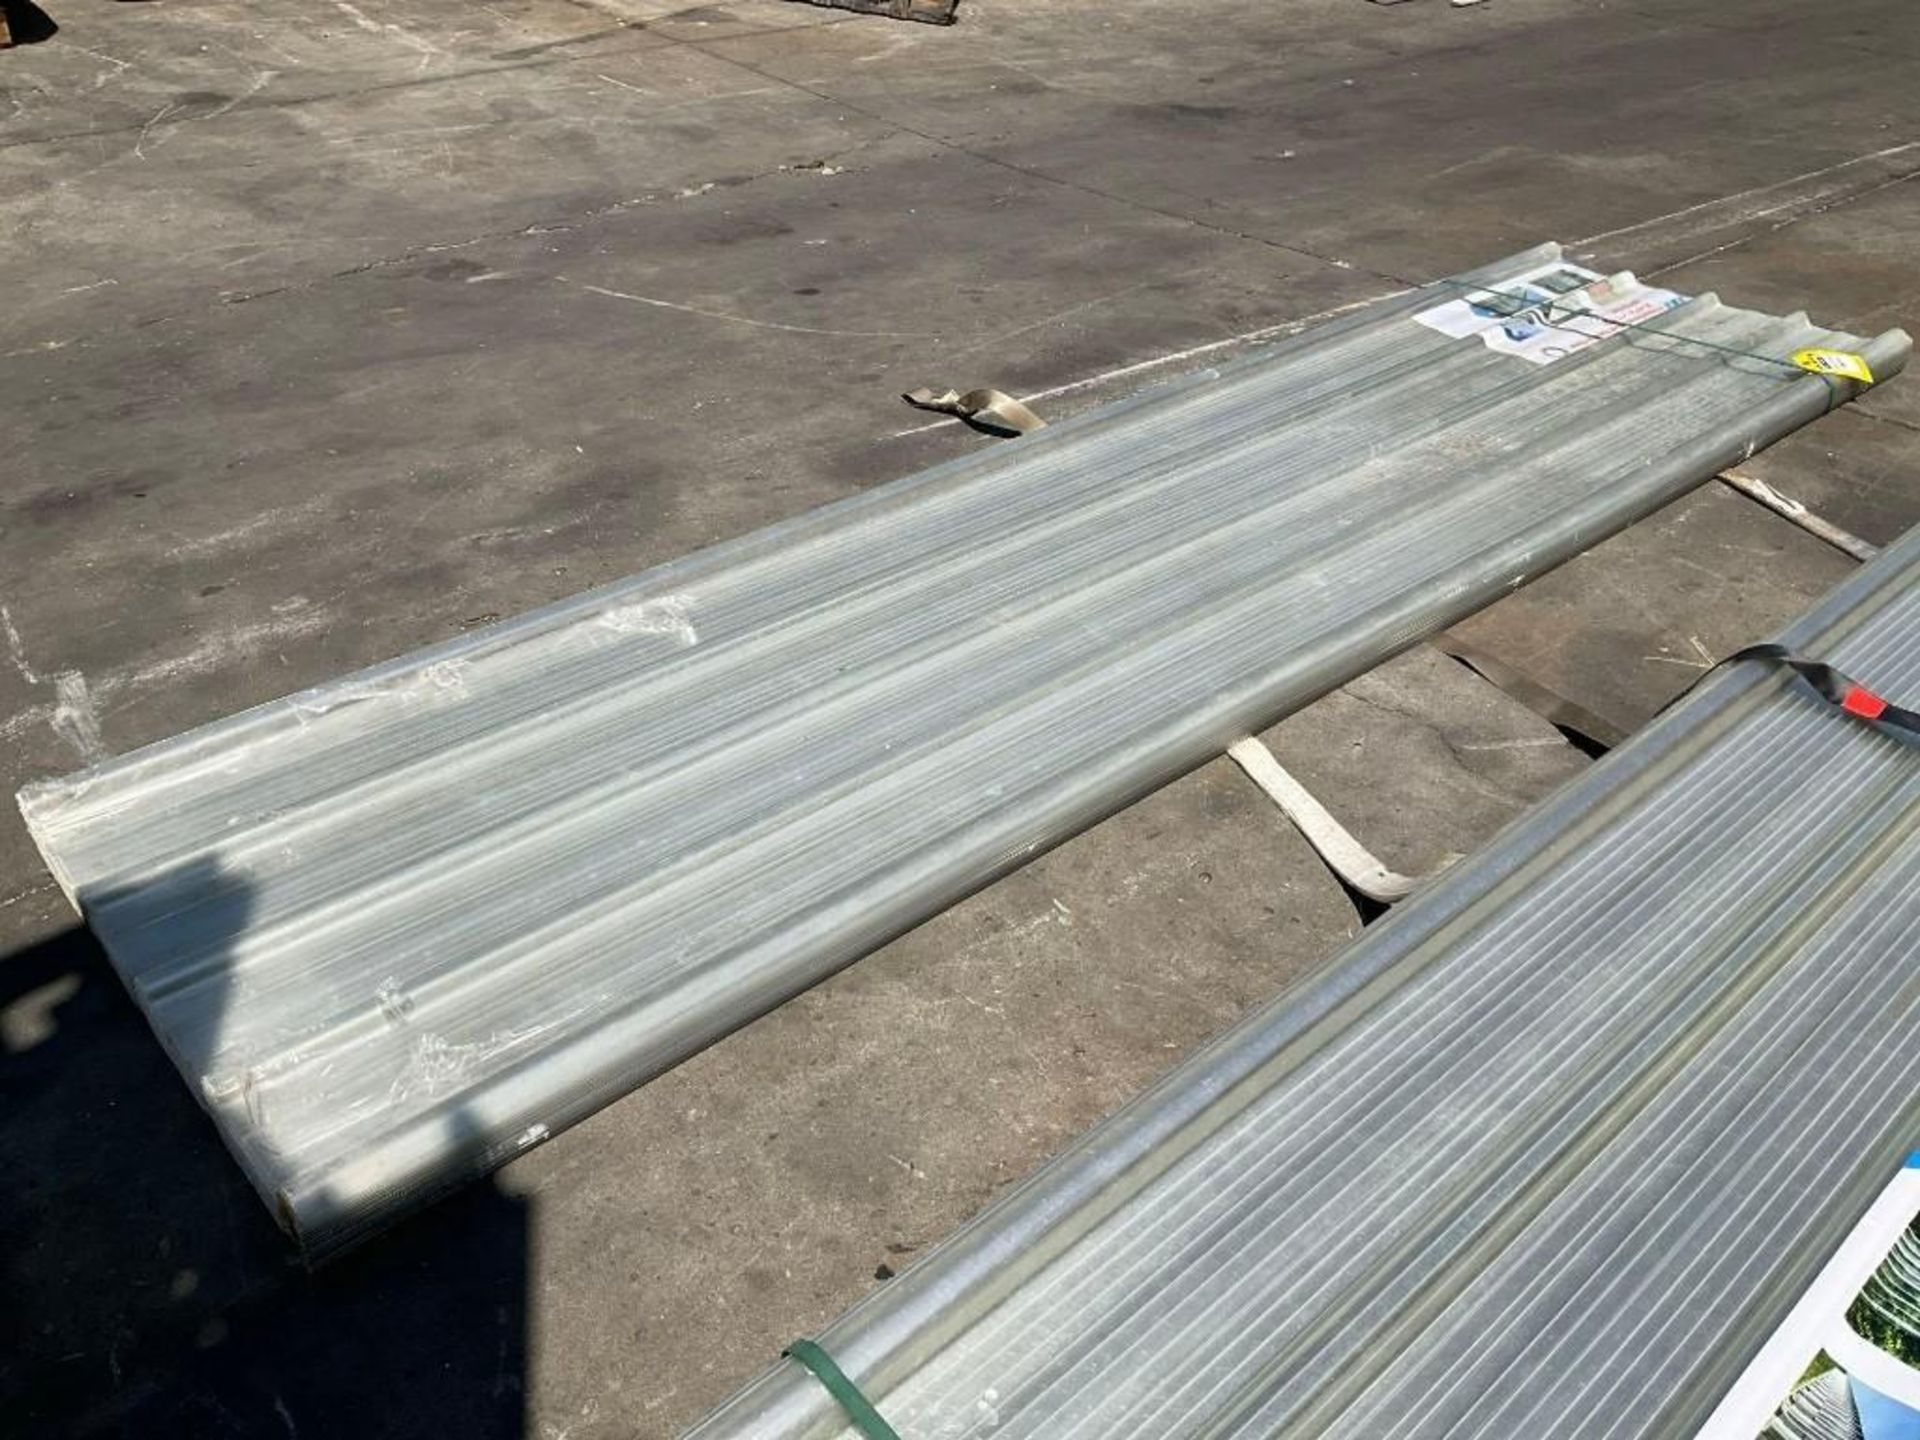 UNUSED POLYCARBONATE ROOF PANELS CLEAR WITH ( 1 ) METAL FORKLIFT PALLET, PANELS APPROX 35.43IN x - Image 4 of 7